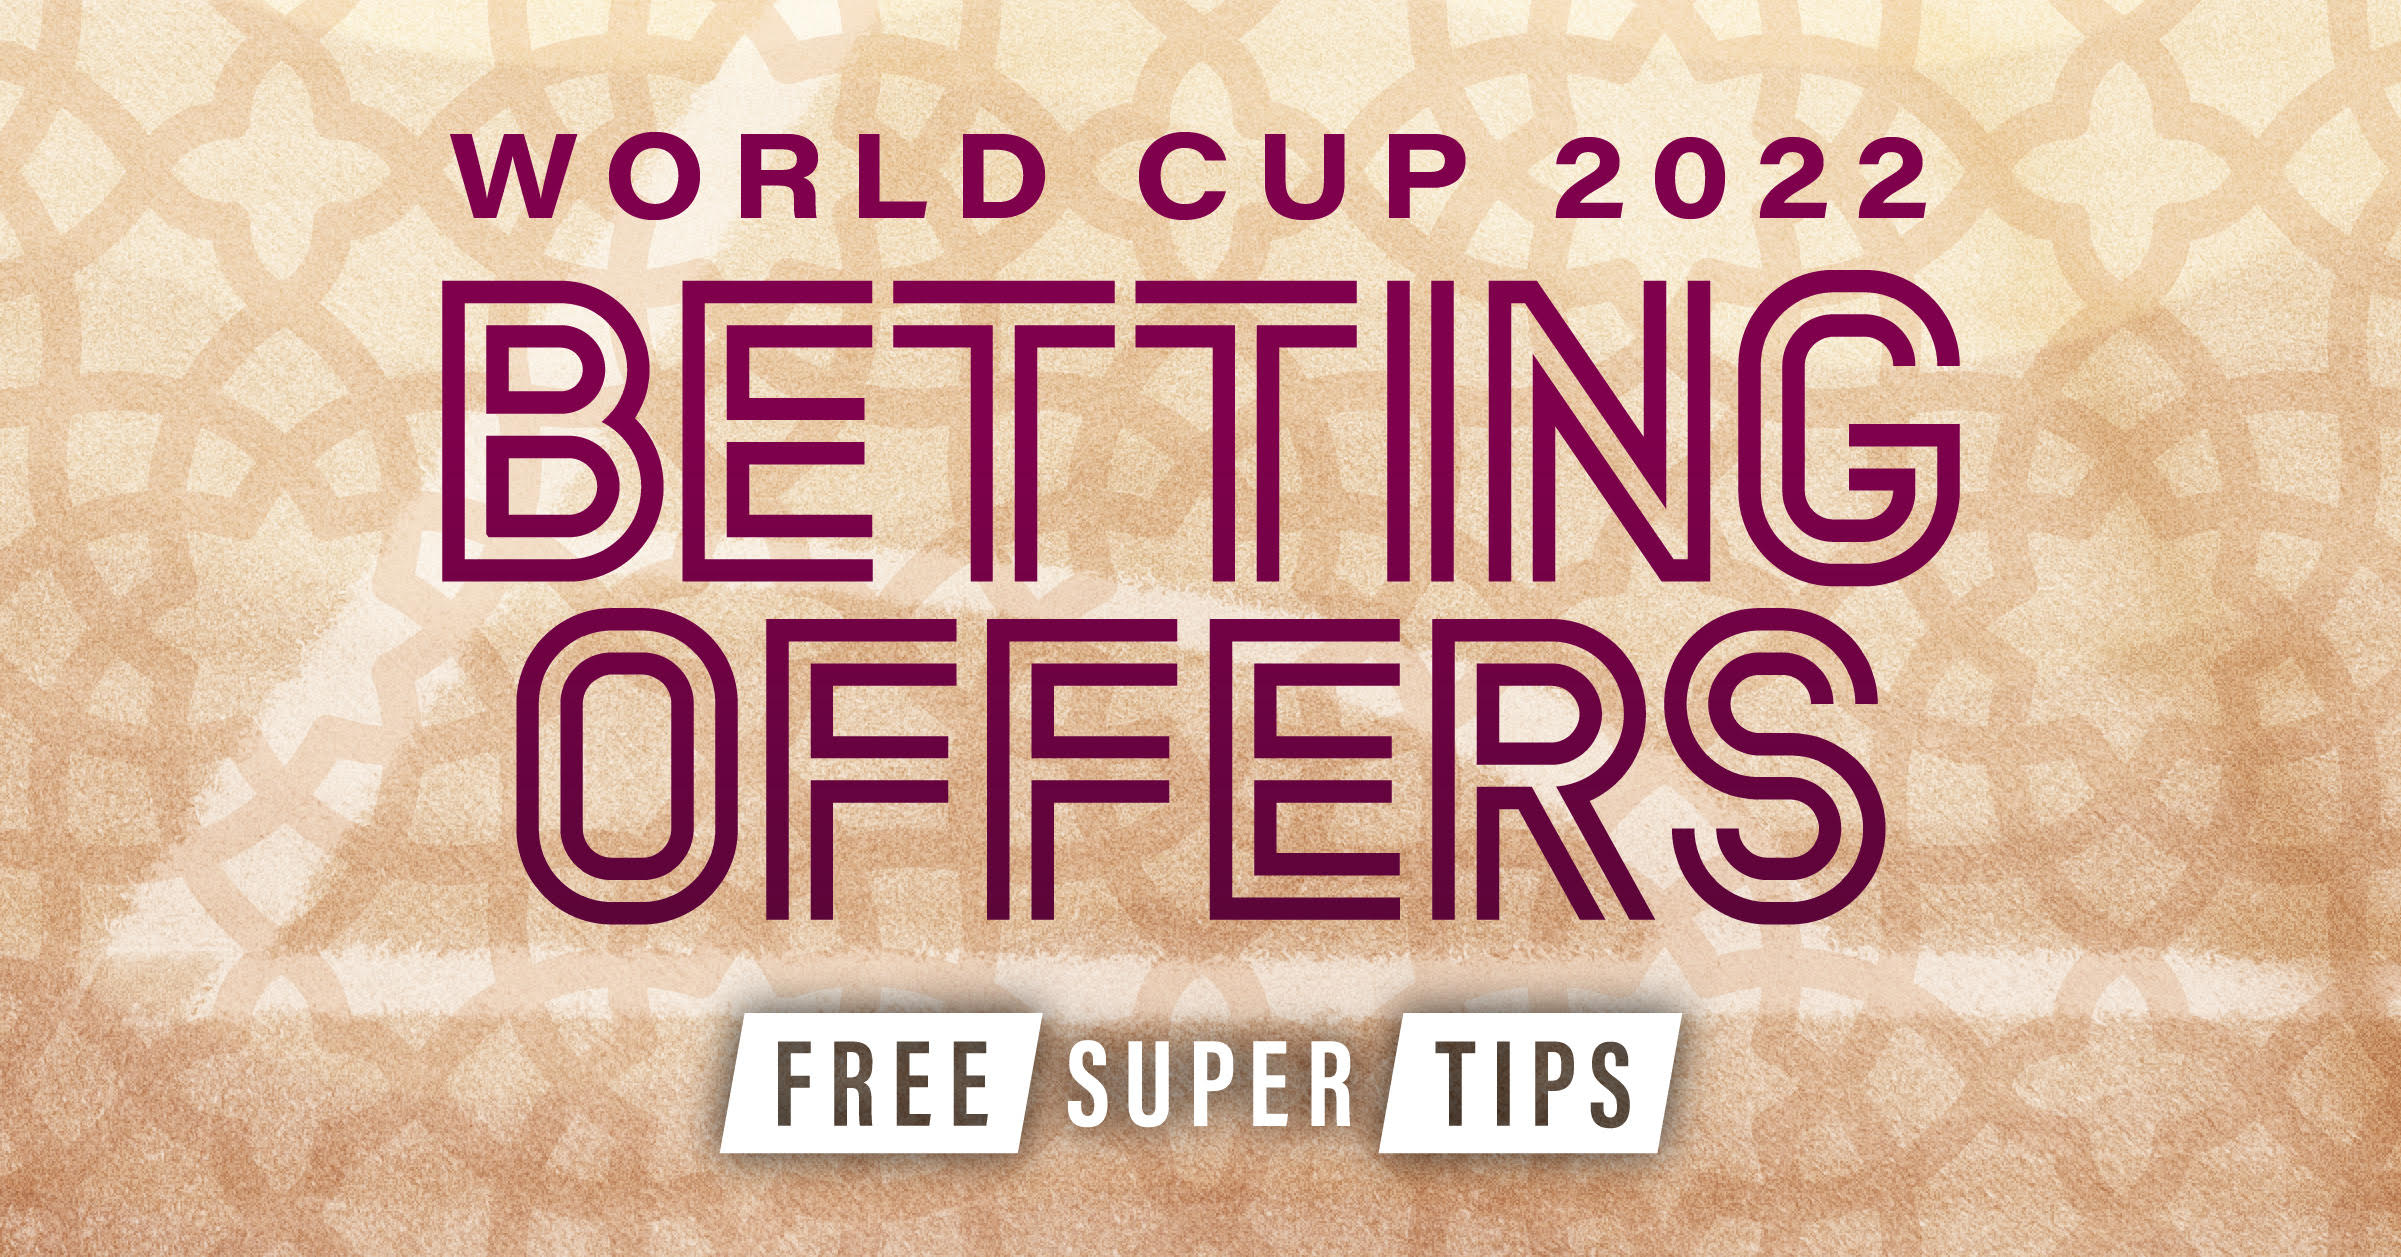 Experts' Best Bets: 6 tipsters pick out 222/1 Sunday acca